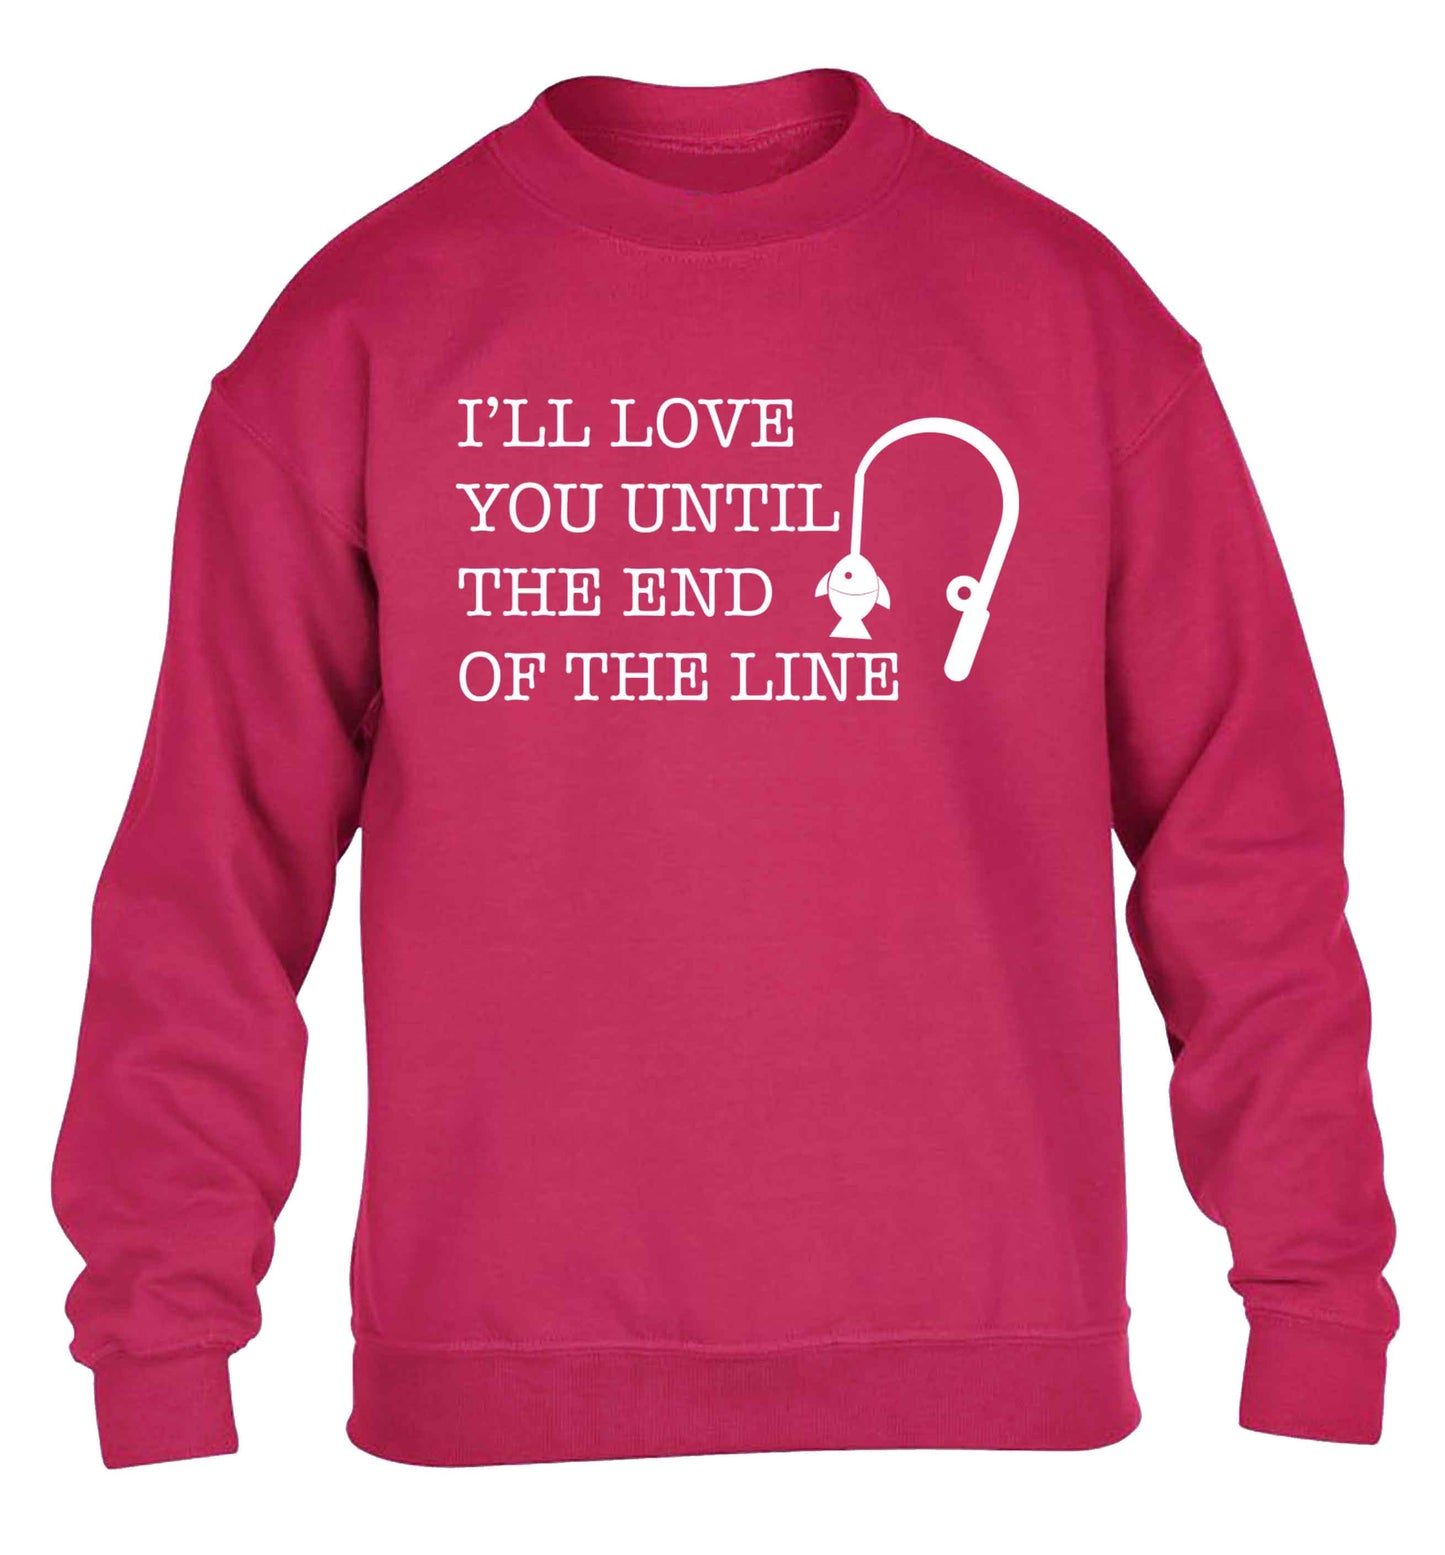 I'll love you until the end of the line children's pink sweater 12-13 Years